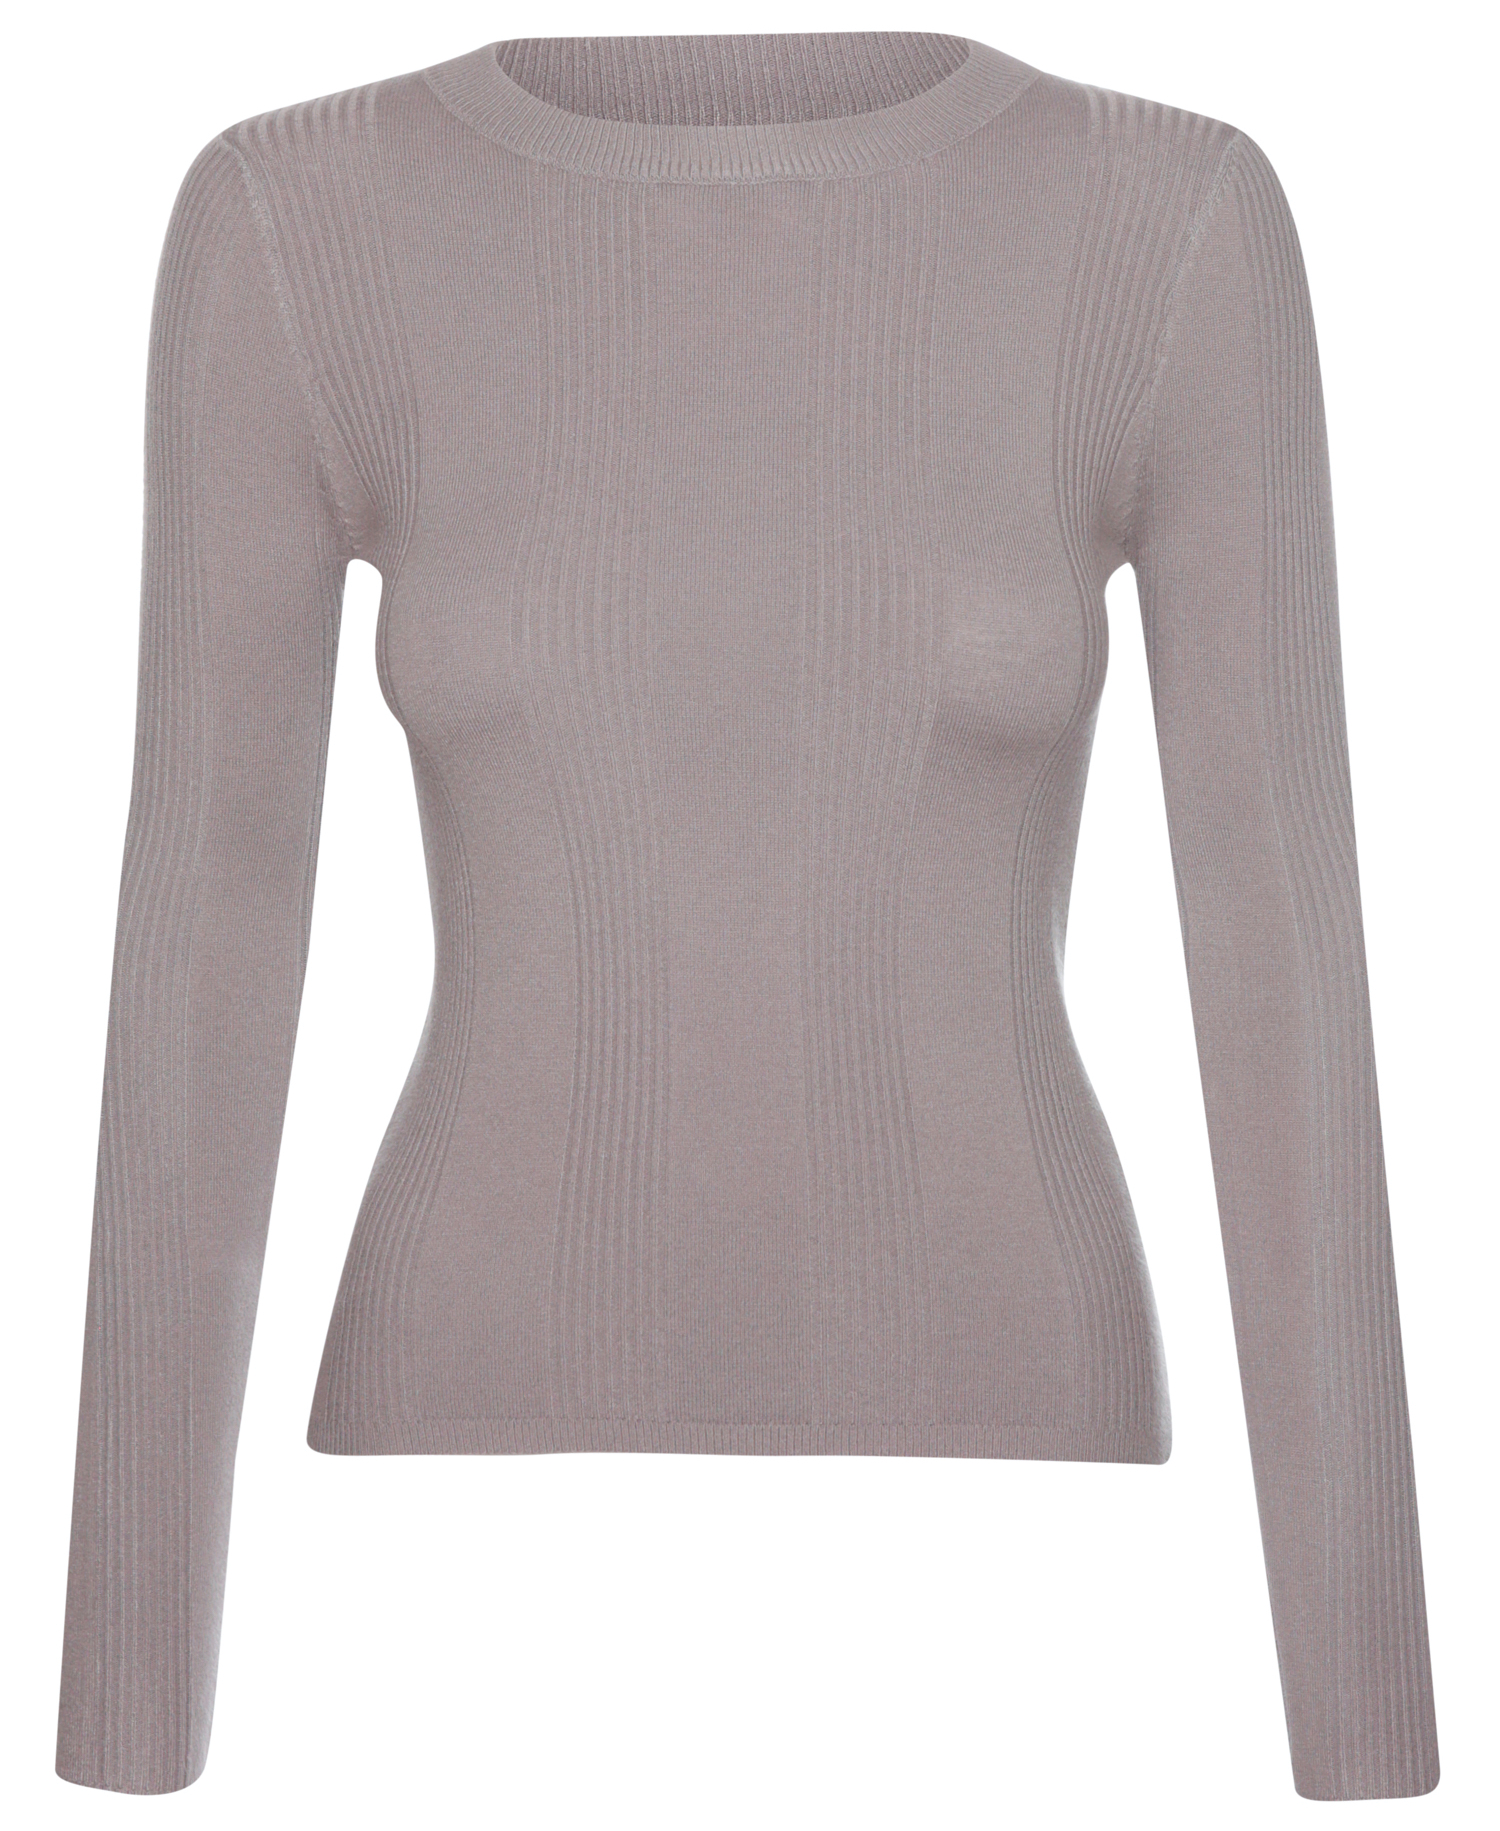 Textured Long Sleeve Knit Top